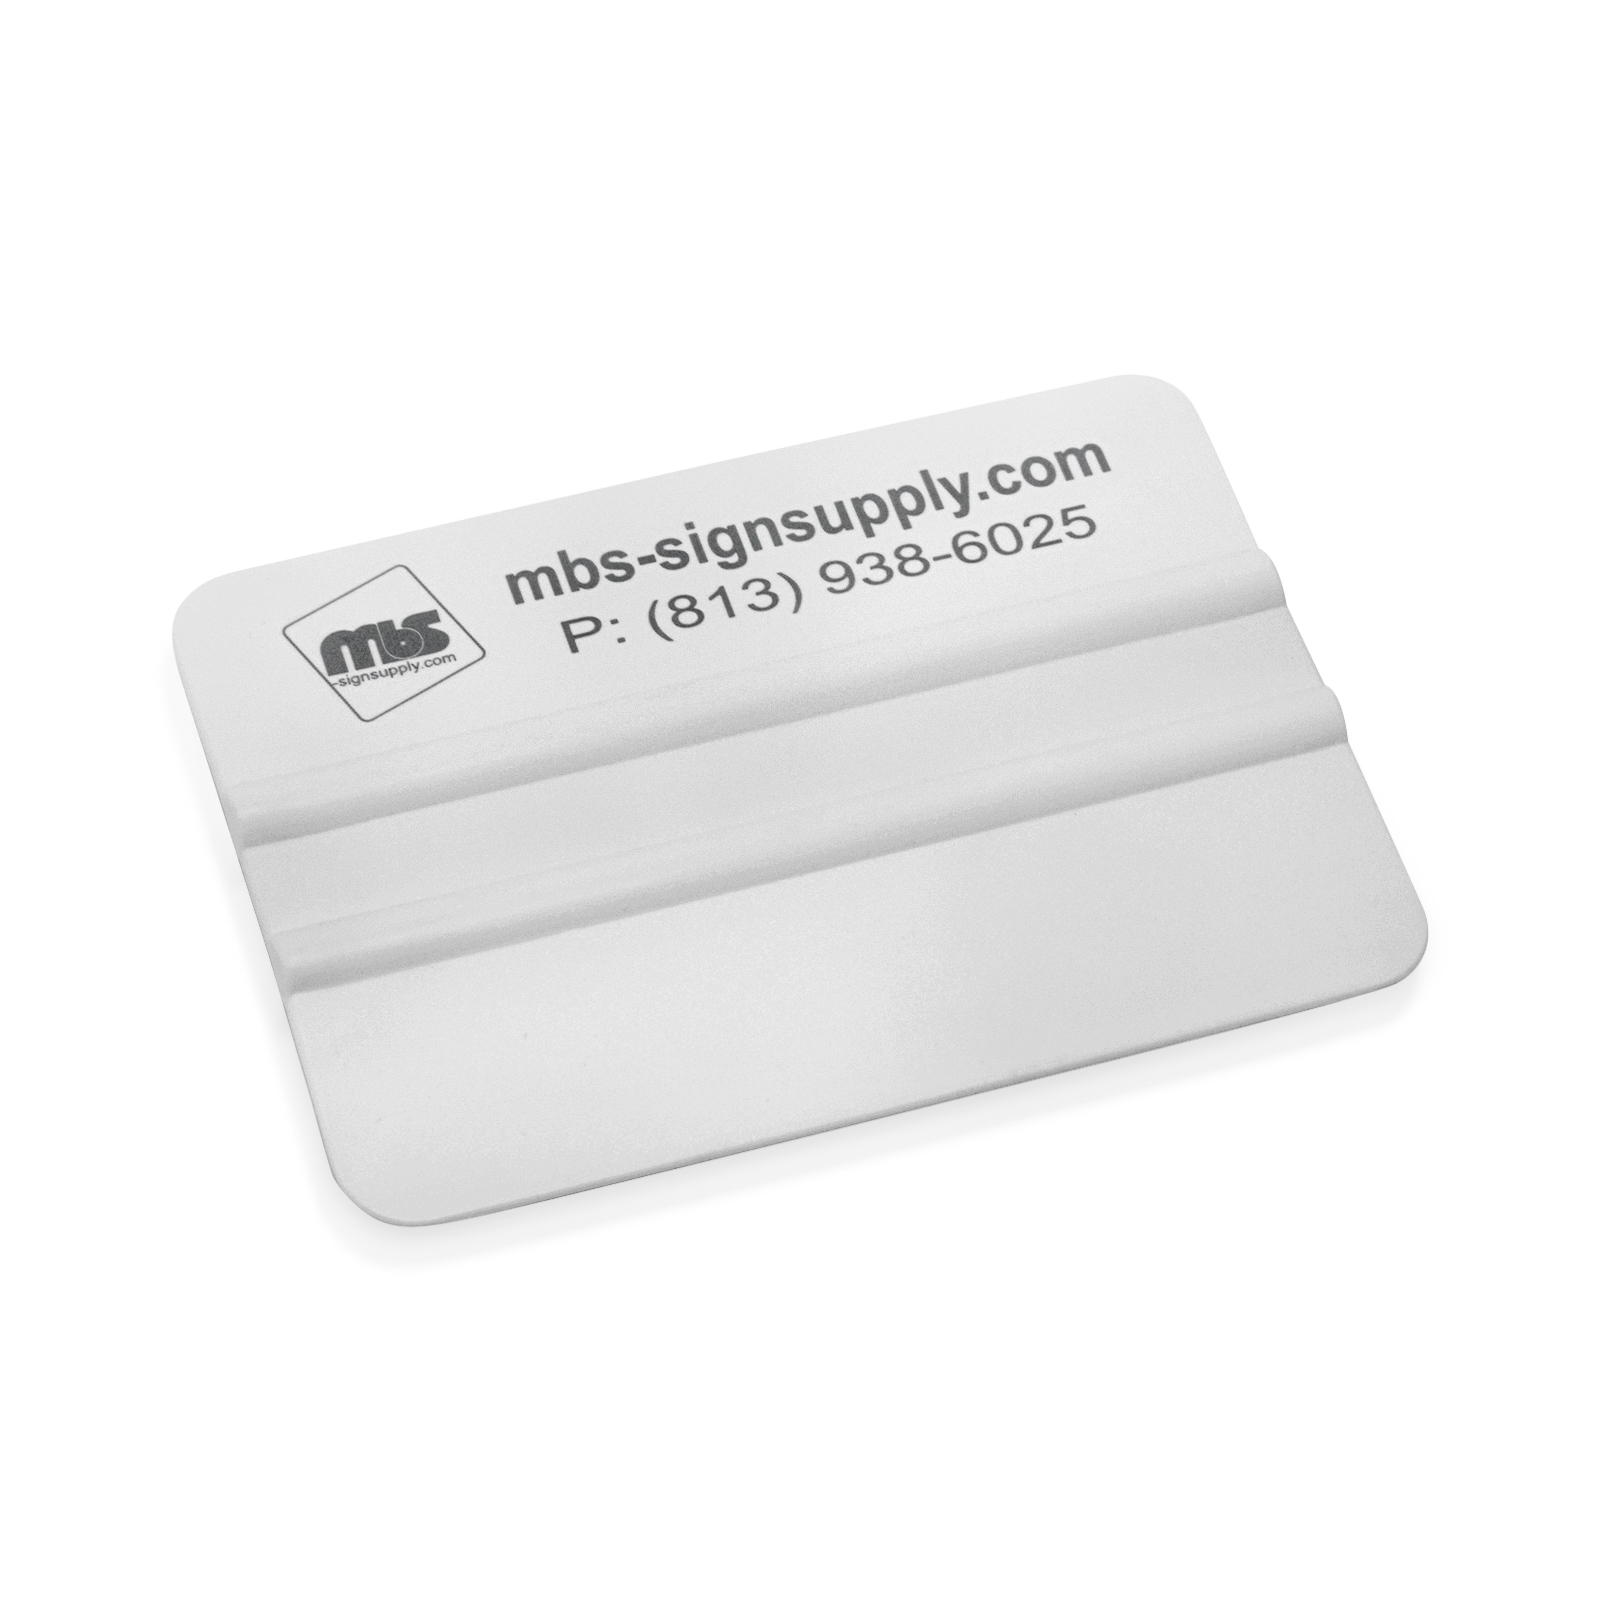 MBS 4'' x 3'' White Squeegee, Soft Hardness for Vinyl and Film Application